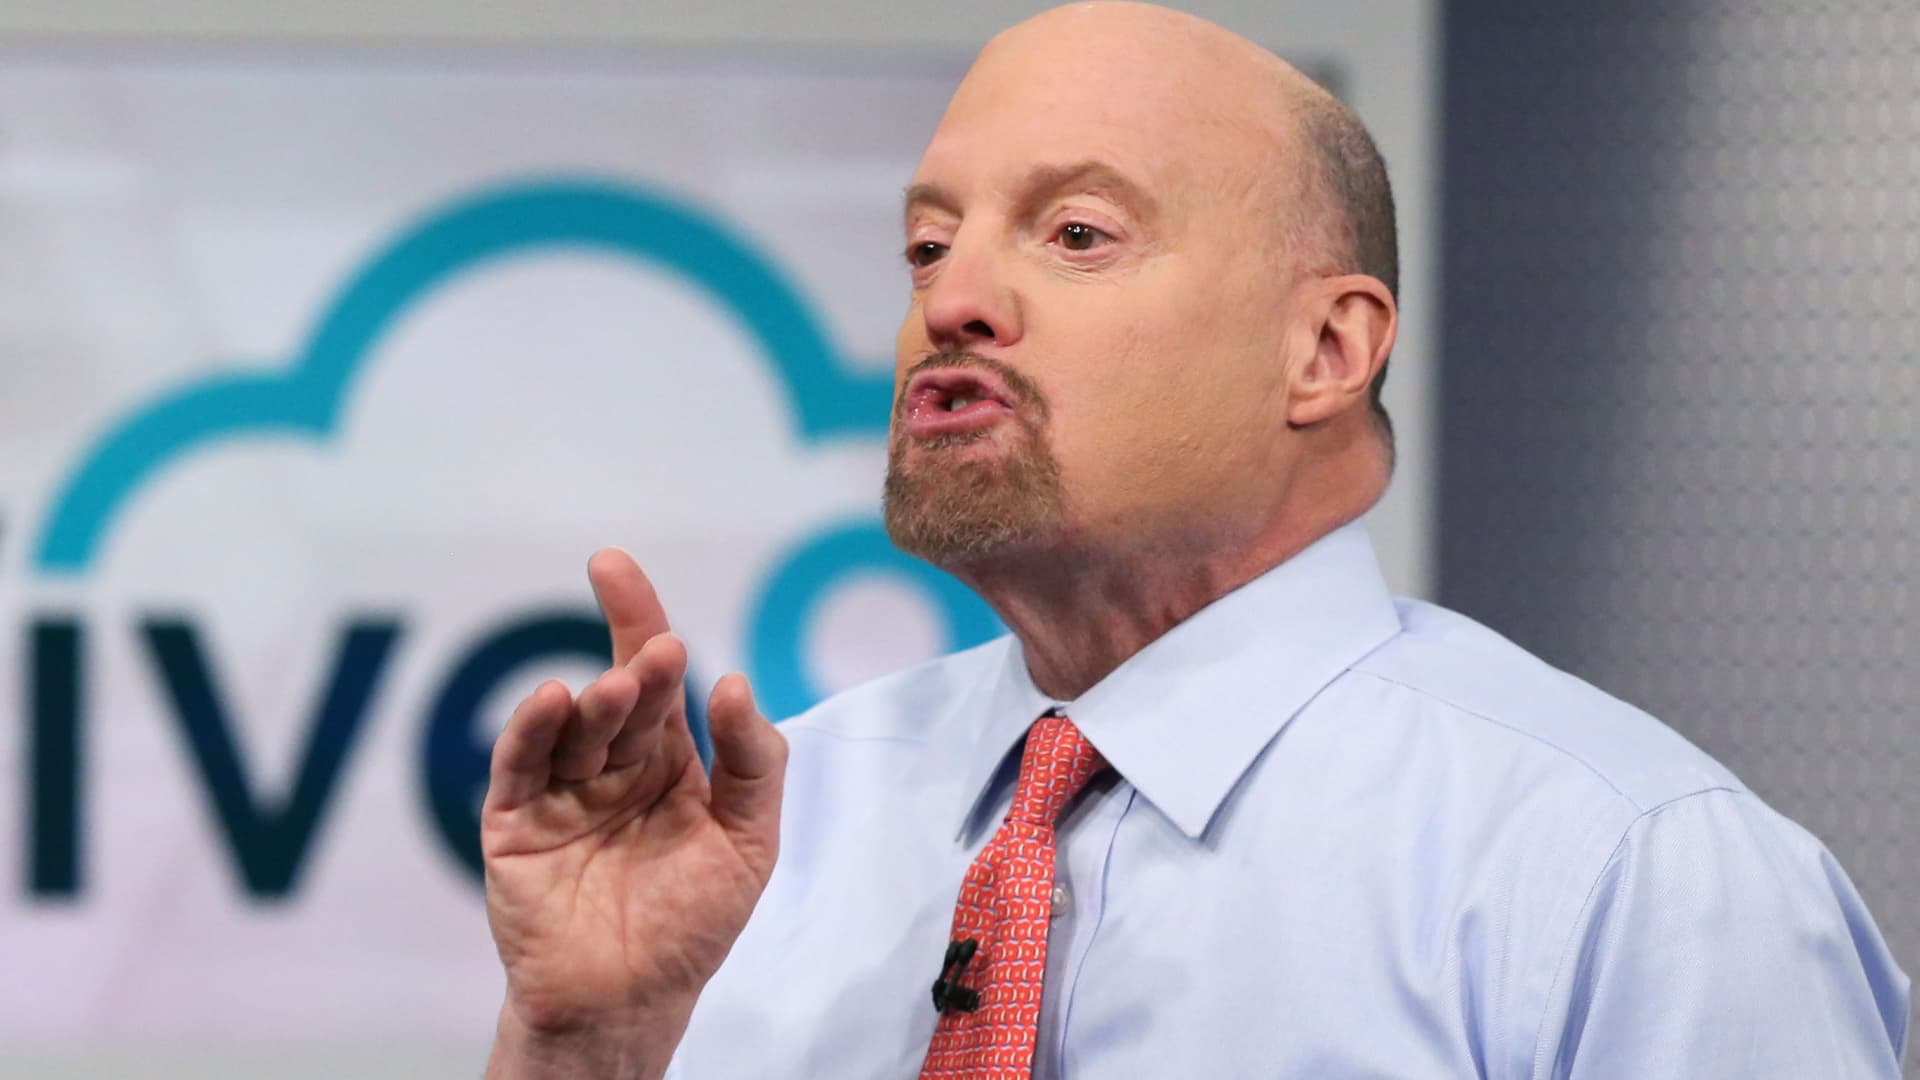 Jim Cramer says investors can hide in these three recession-proof packaged food stocks